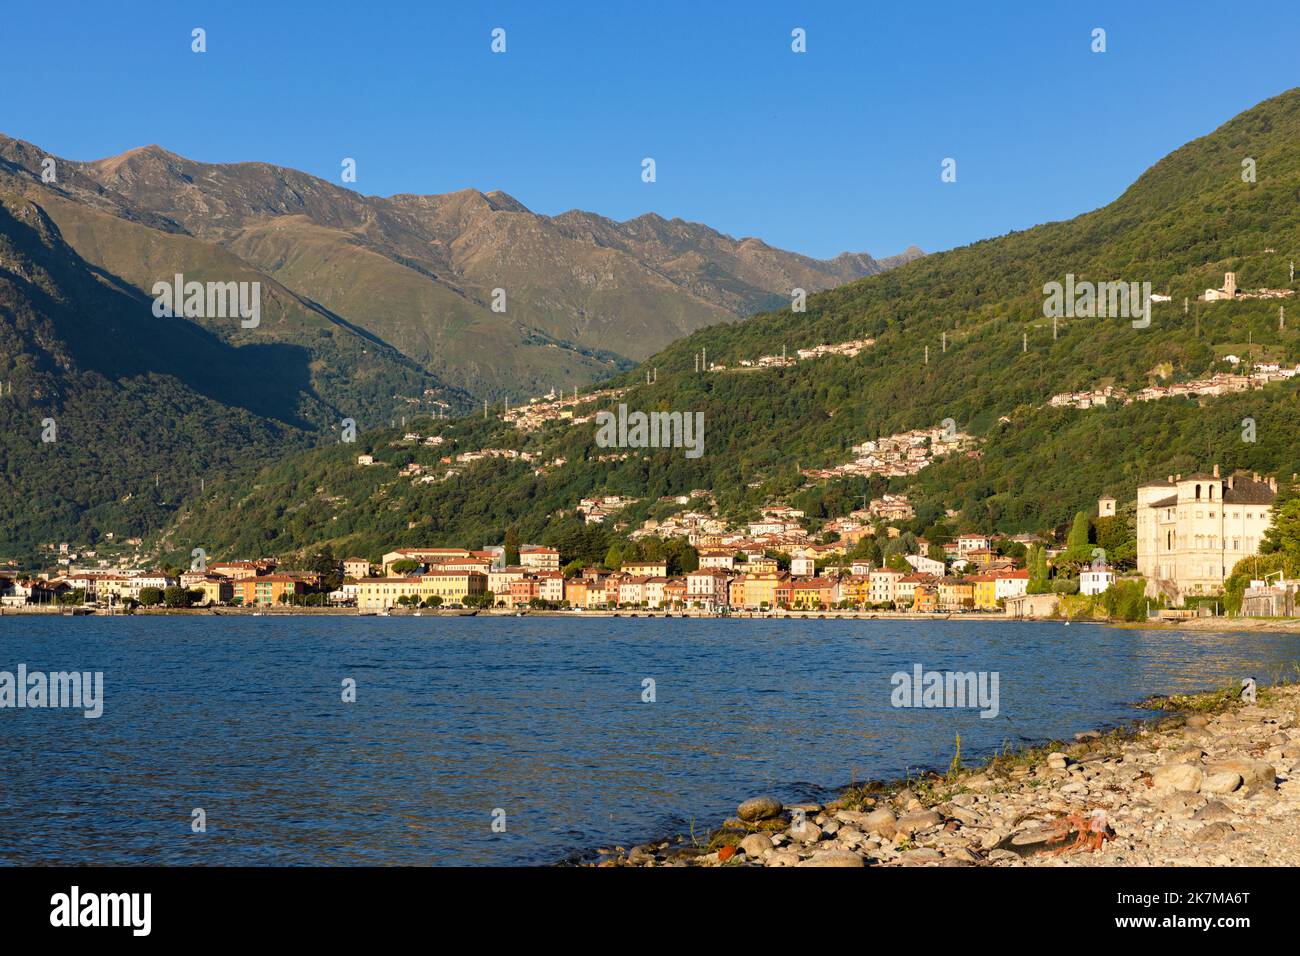 Town of Gravedona ed Unidi on Lake Como, Italy, view from Domaso in the morning Stock Photo